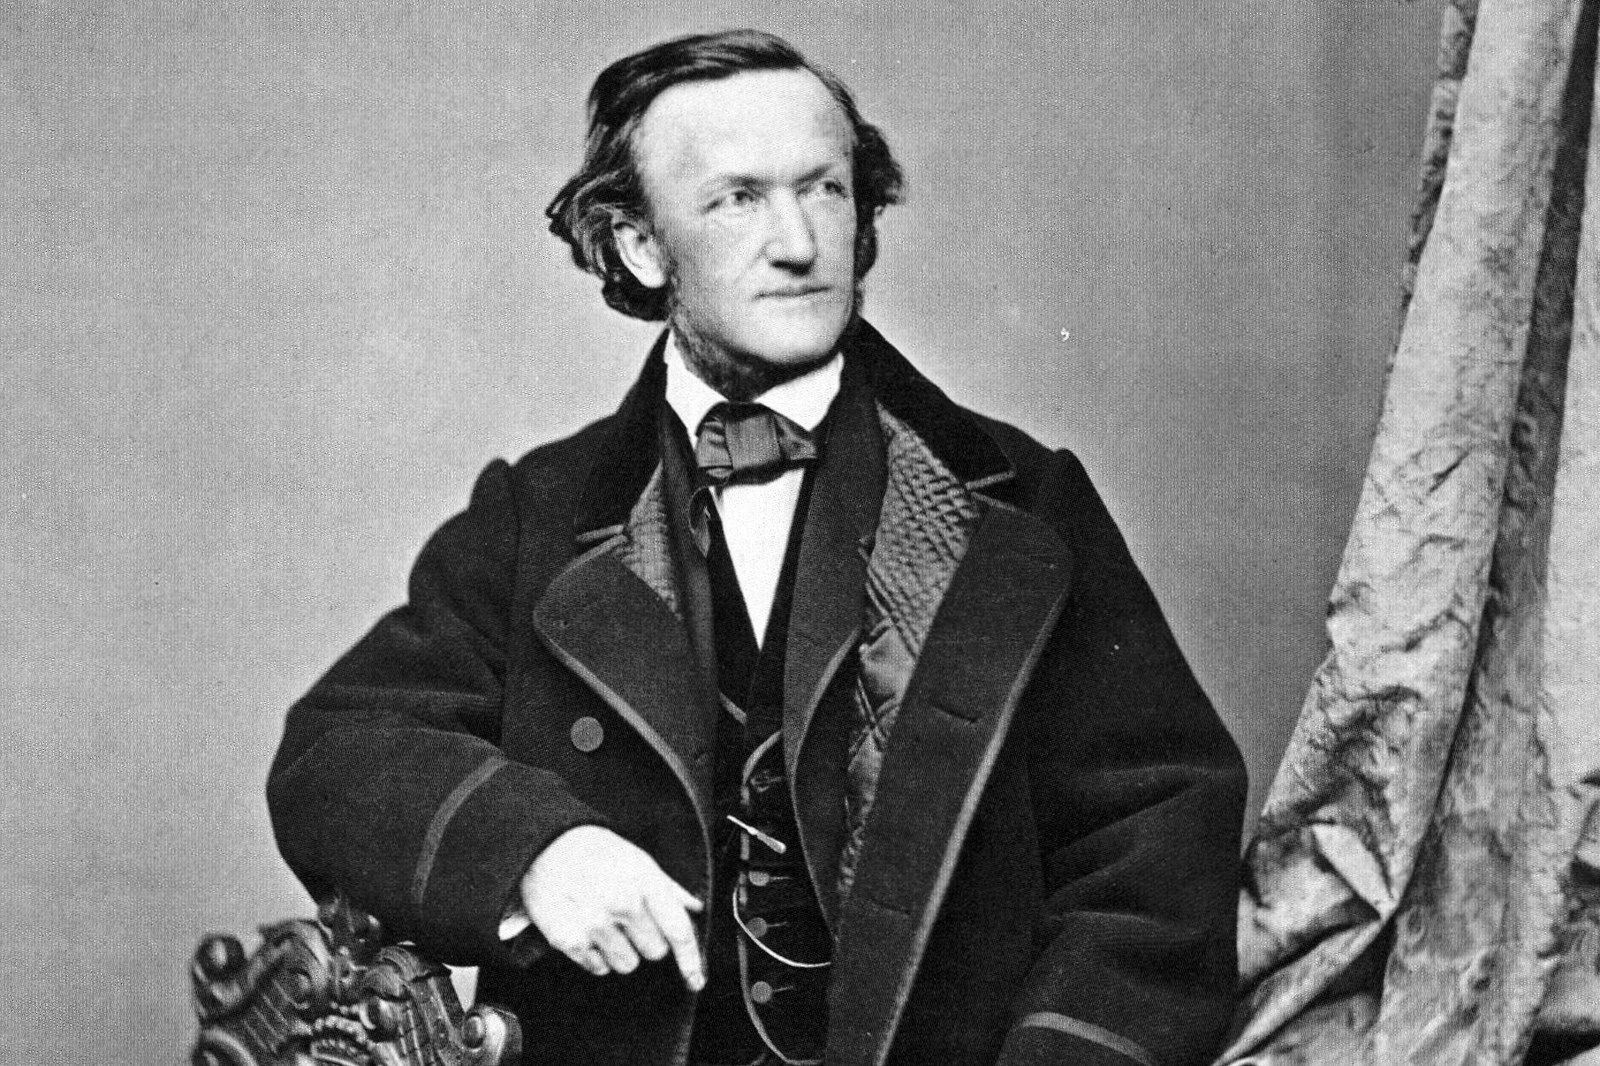 Wagner and Brahms: A Re-examination